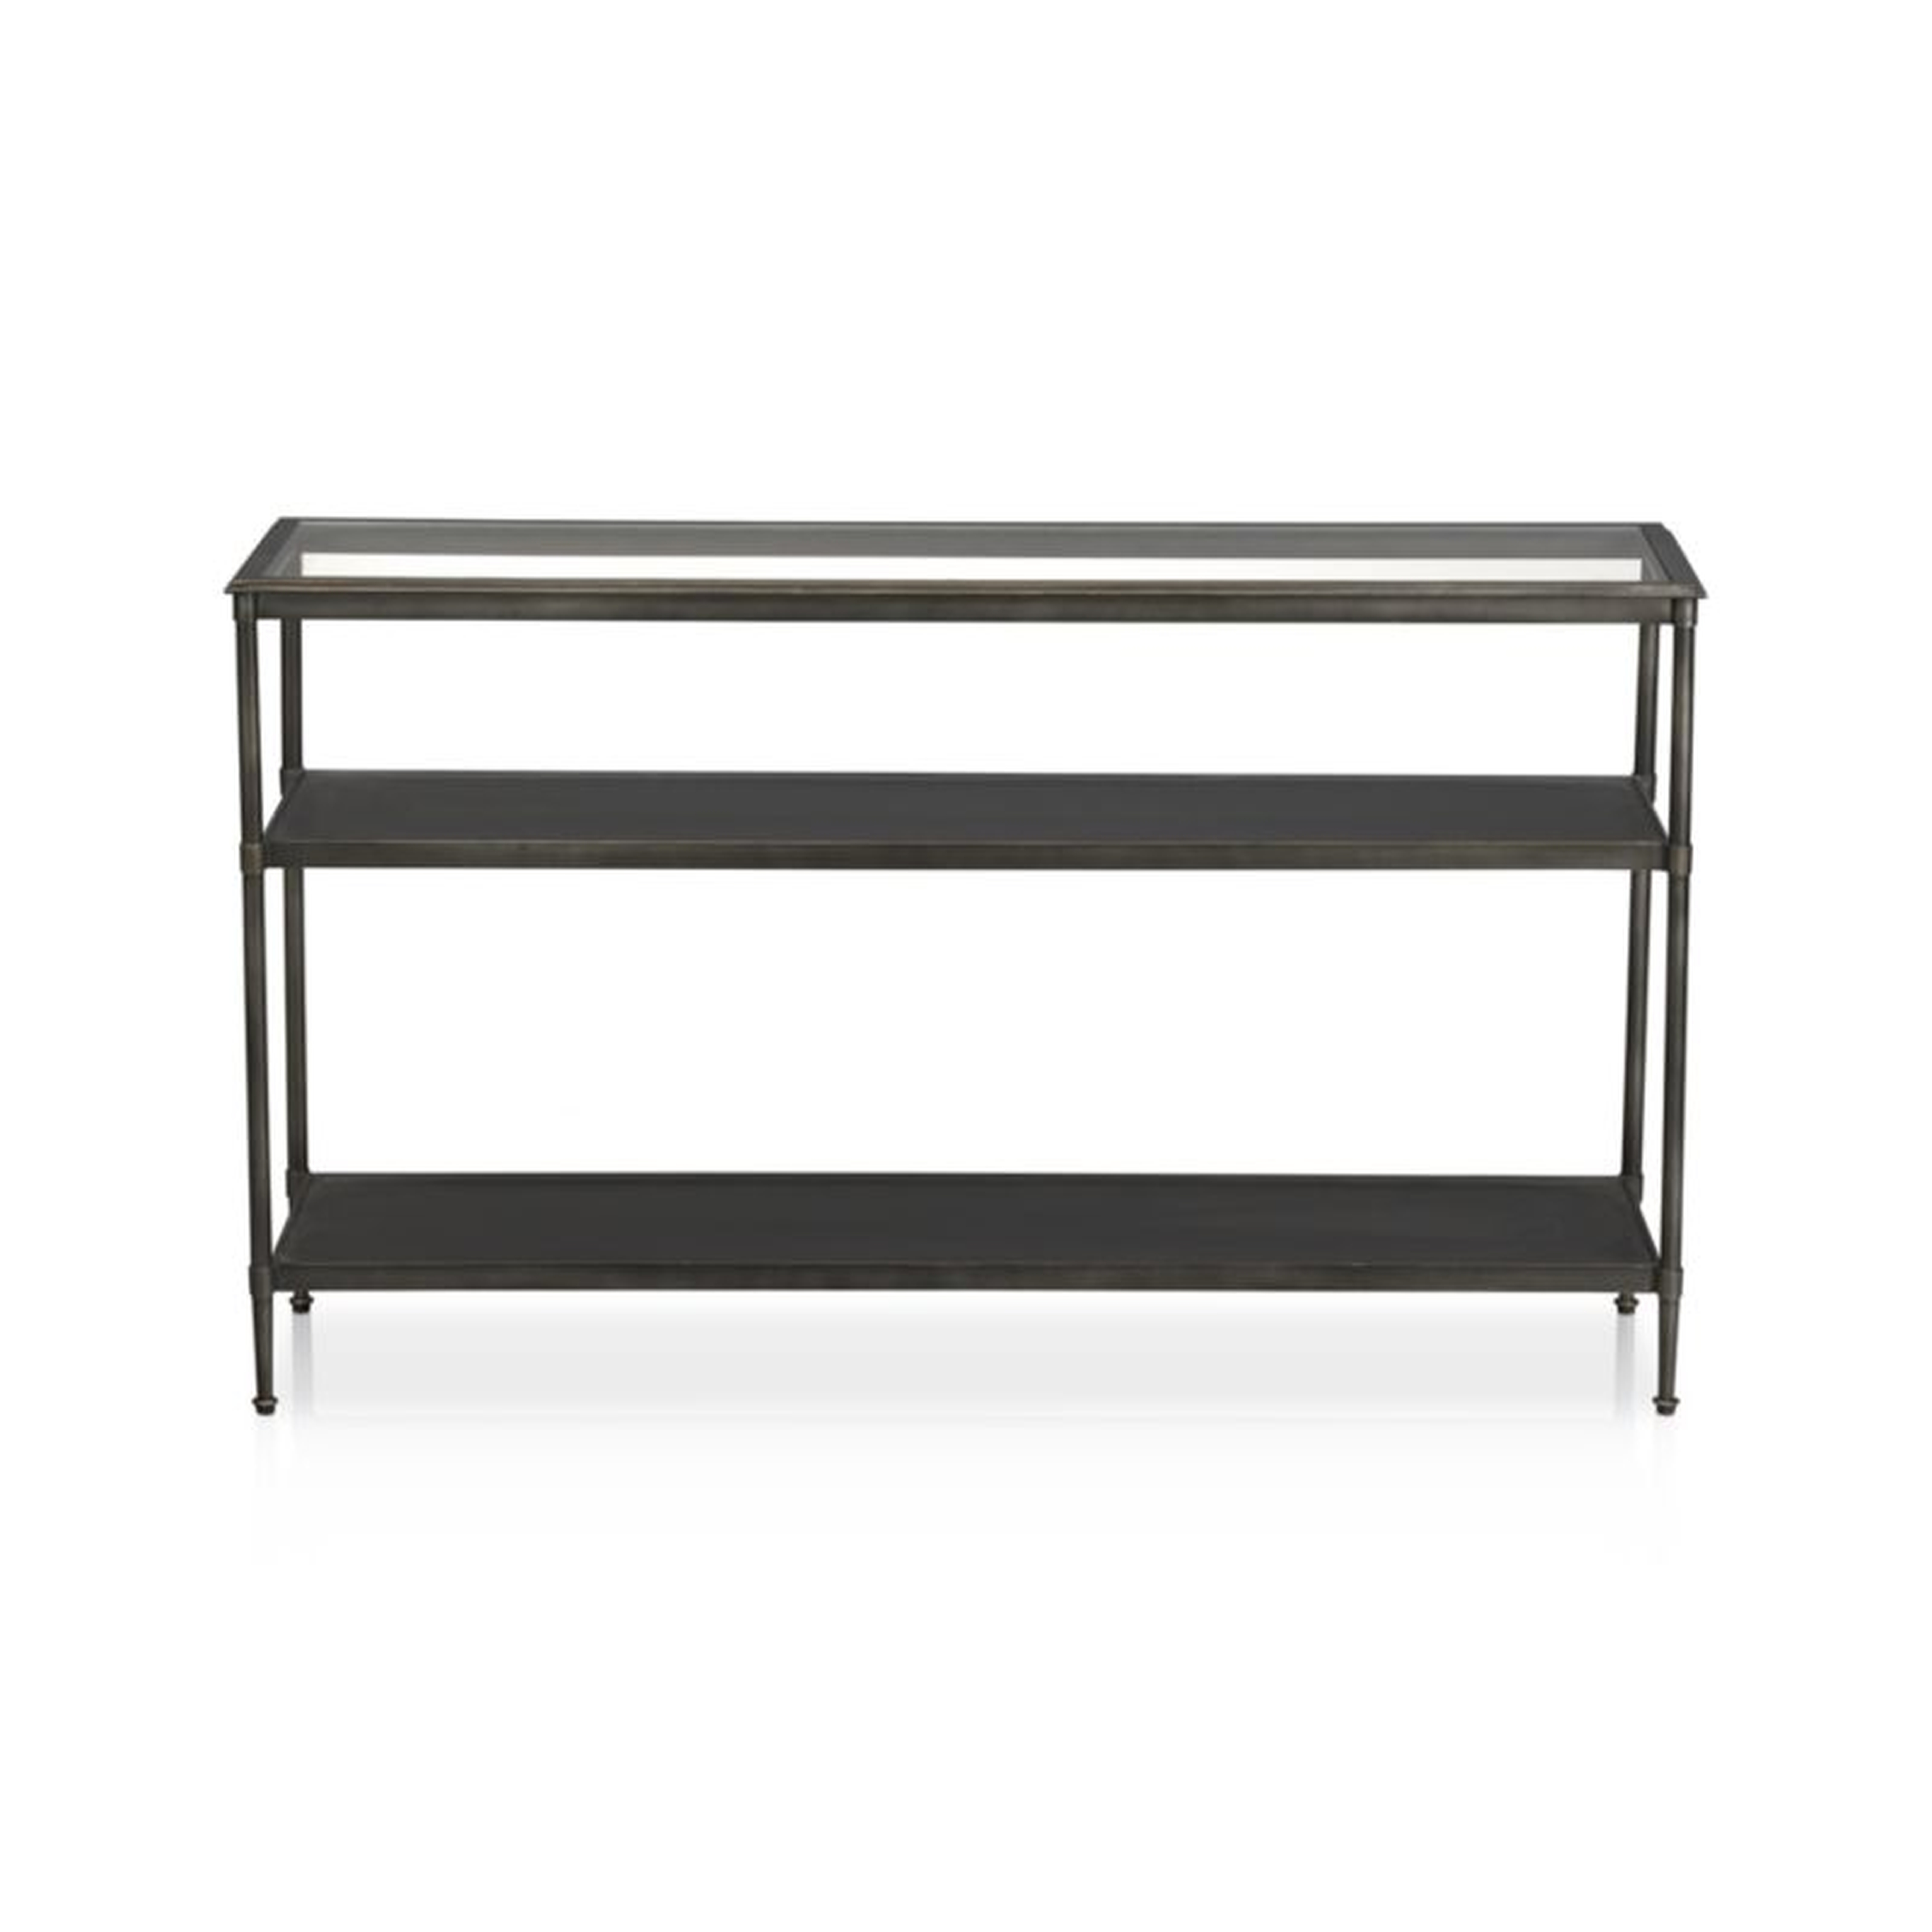 Kyra Console Table - Crate and Barrel